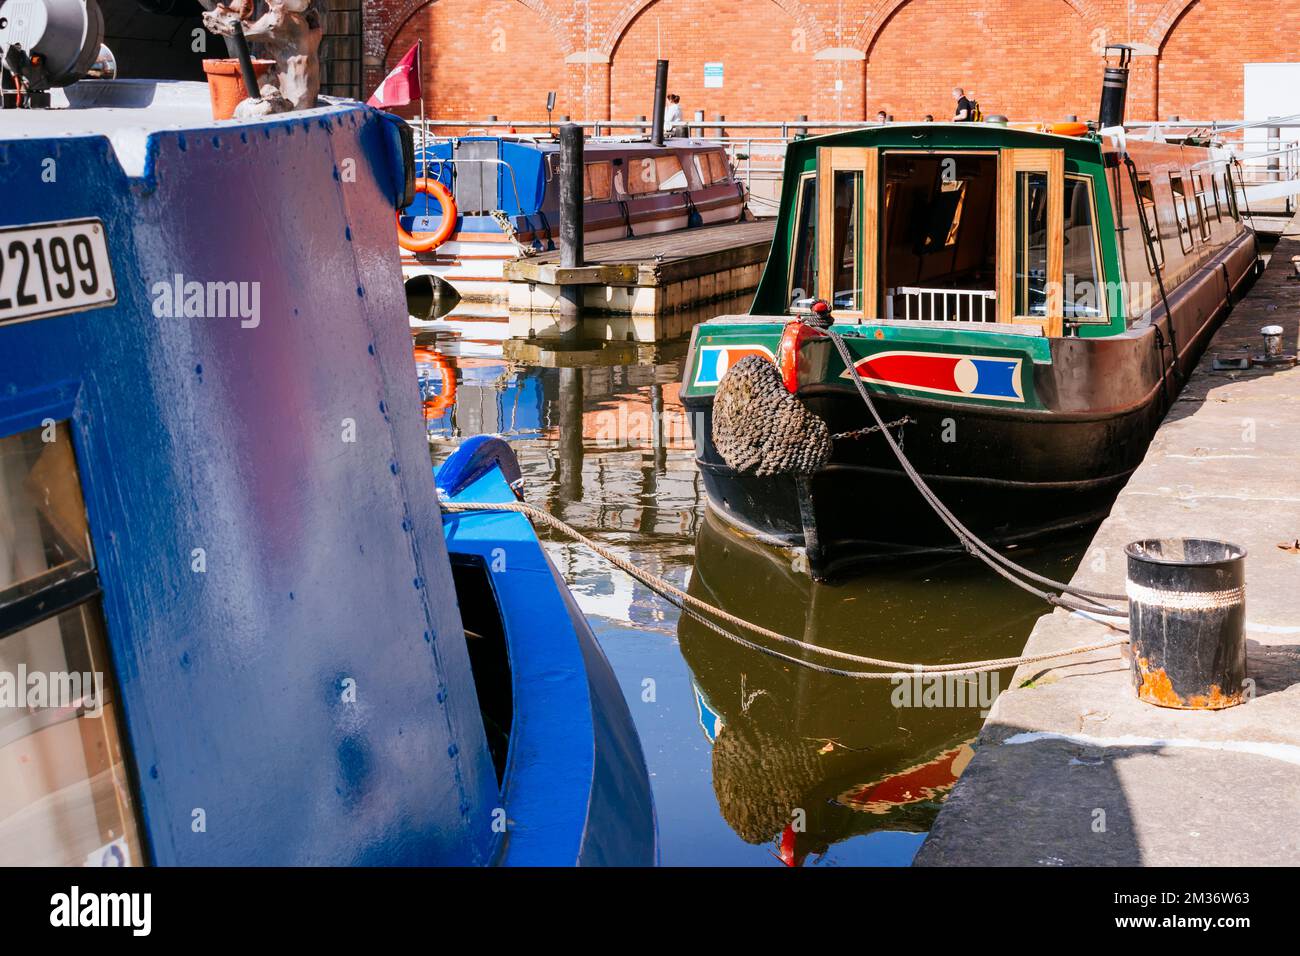 Narrow boats moored in Granary Wharf. Leeds-Liverpool Canal. Leeds, West Yorkshire, Yorkshire and the Humber, England, United Kingdom, Europe Stock Photo